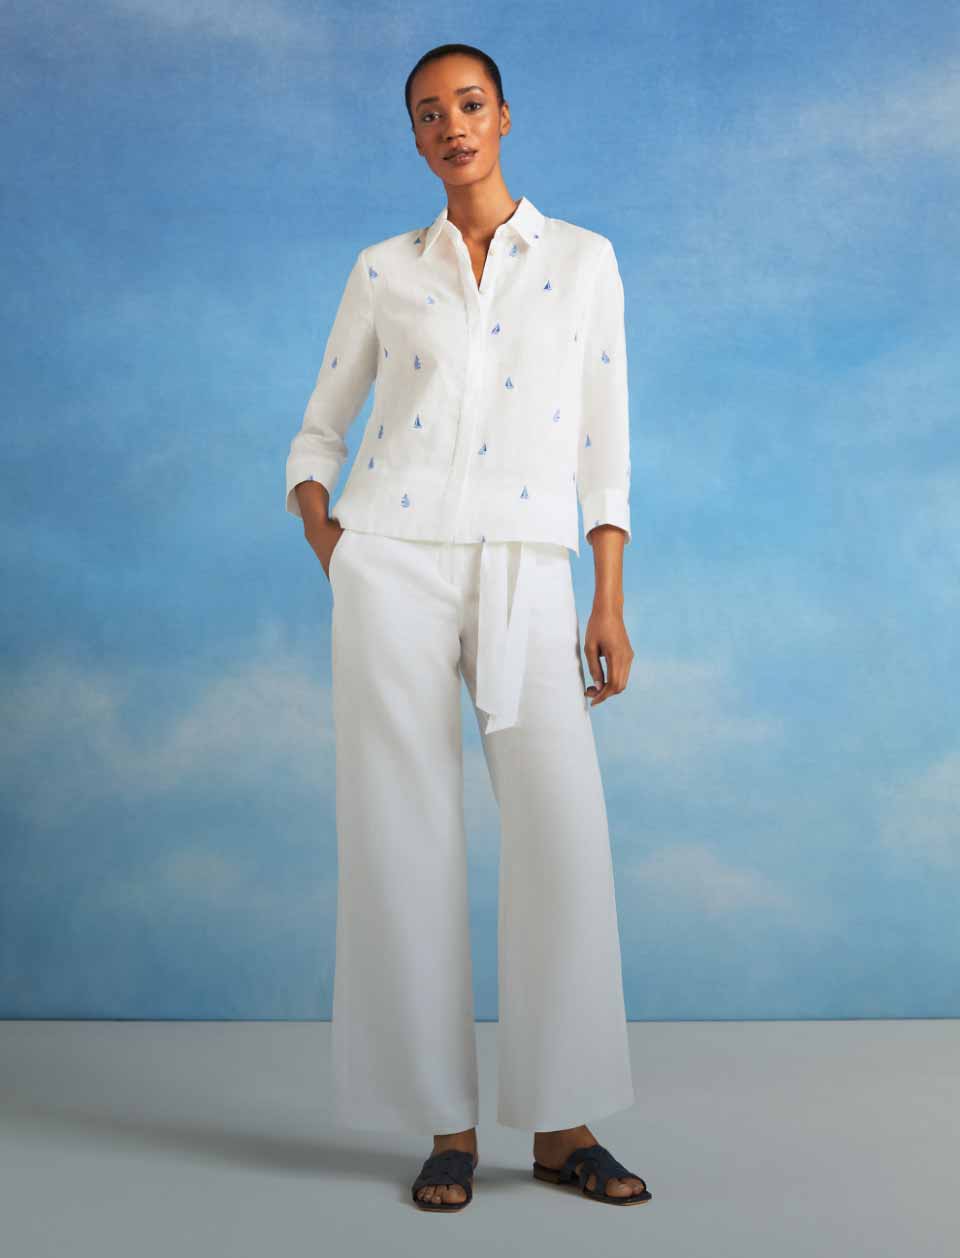 Model photographed in front of a sky blue background wearing a white linen shirt and trousers.